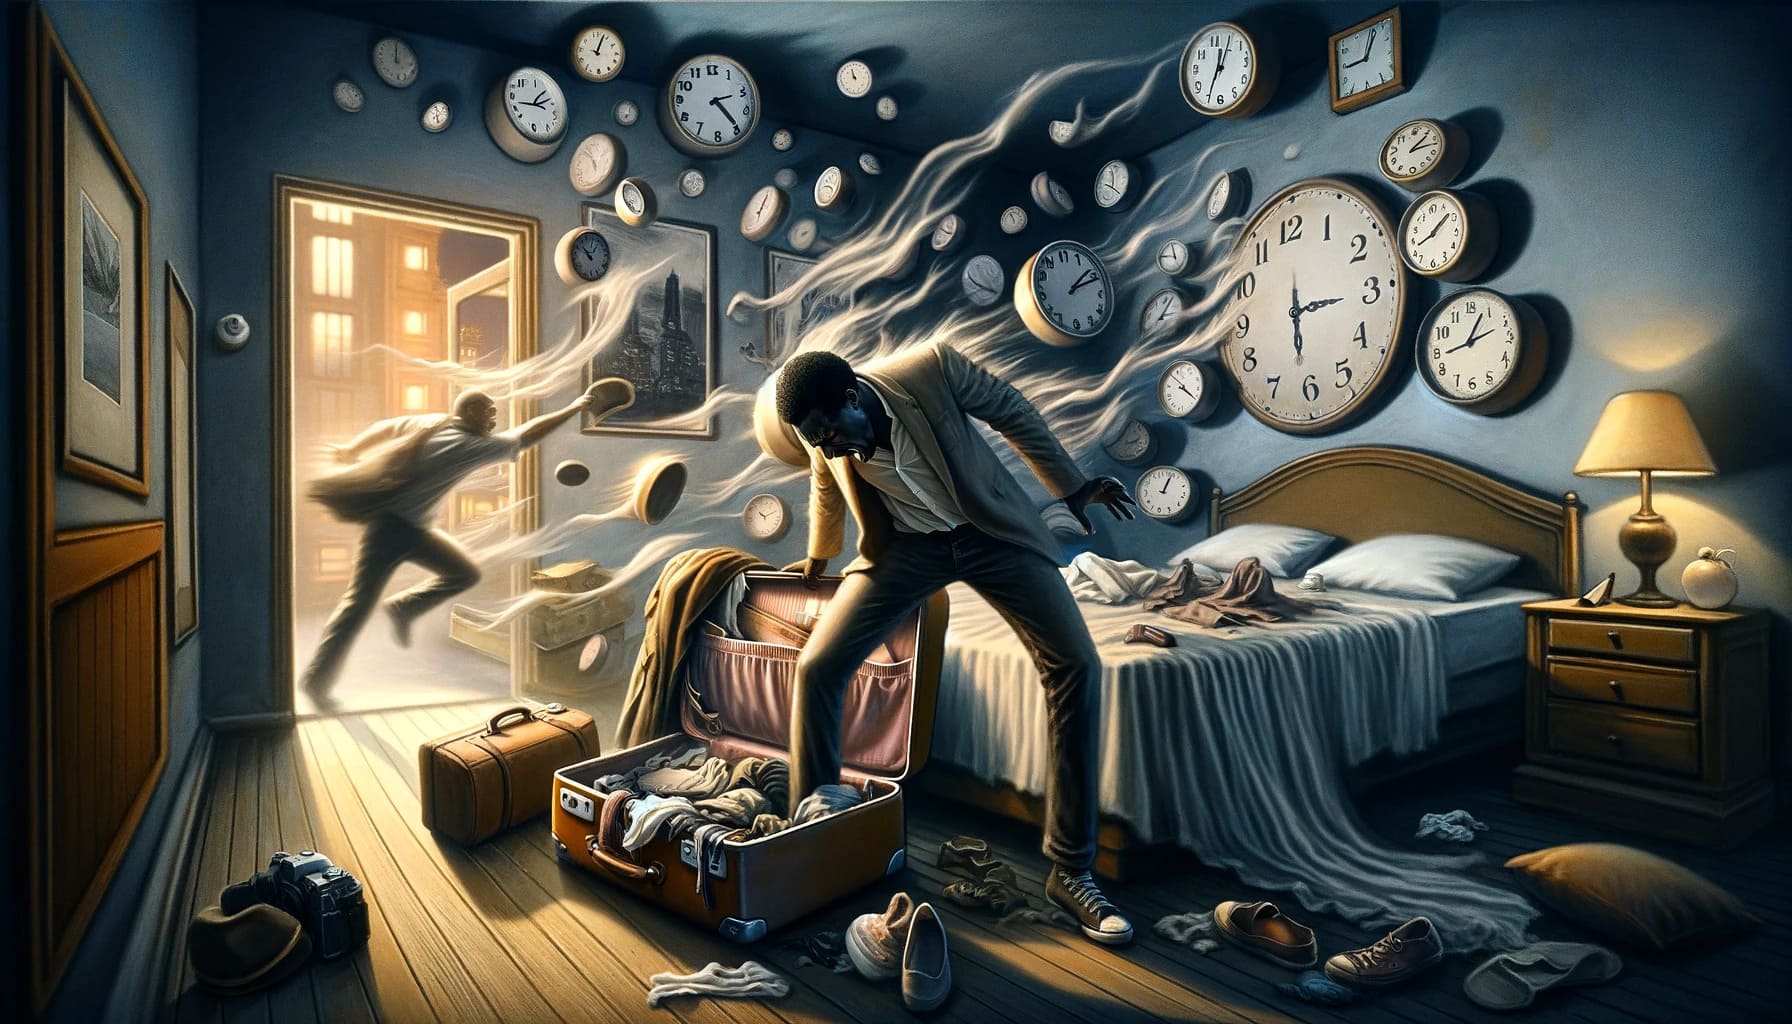         A painting depicting a man surrounded by clocks in a room, evoking feelings of hurriedness and the notion that time is slipping away.